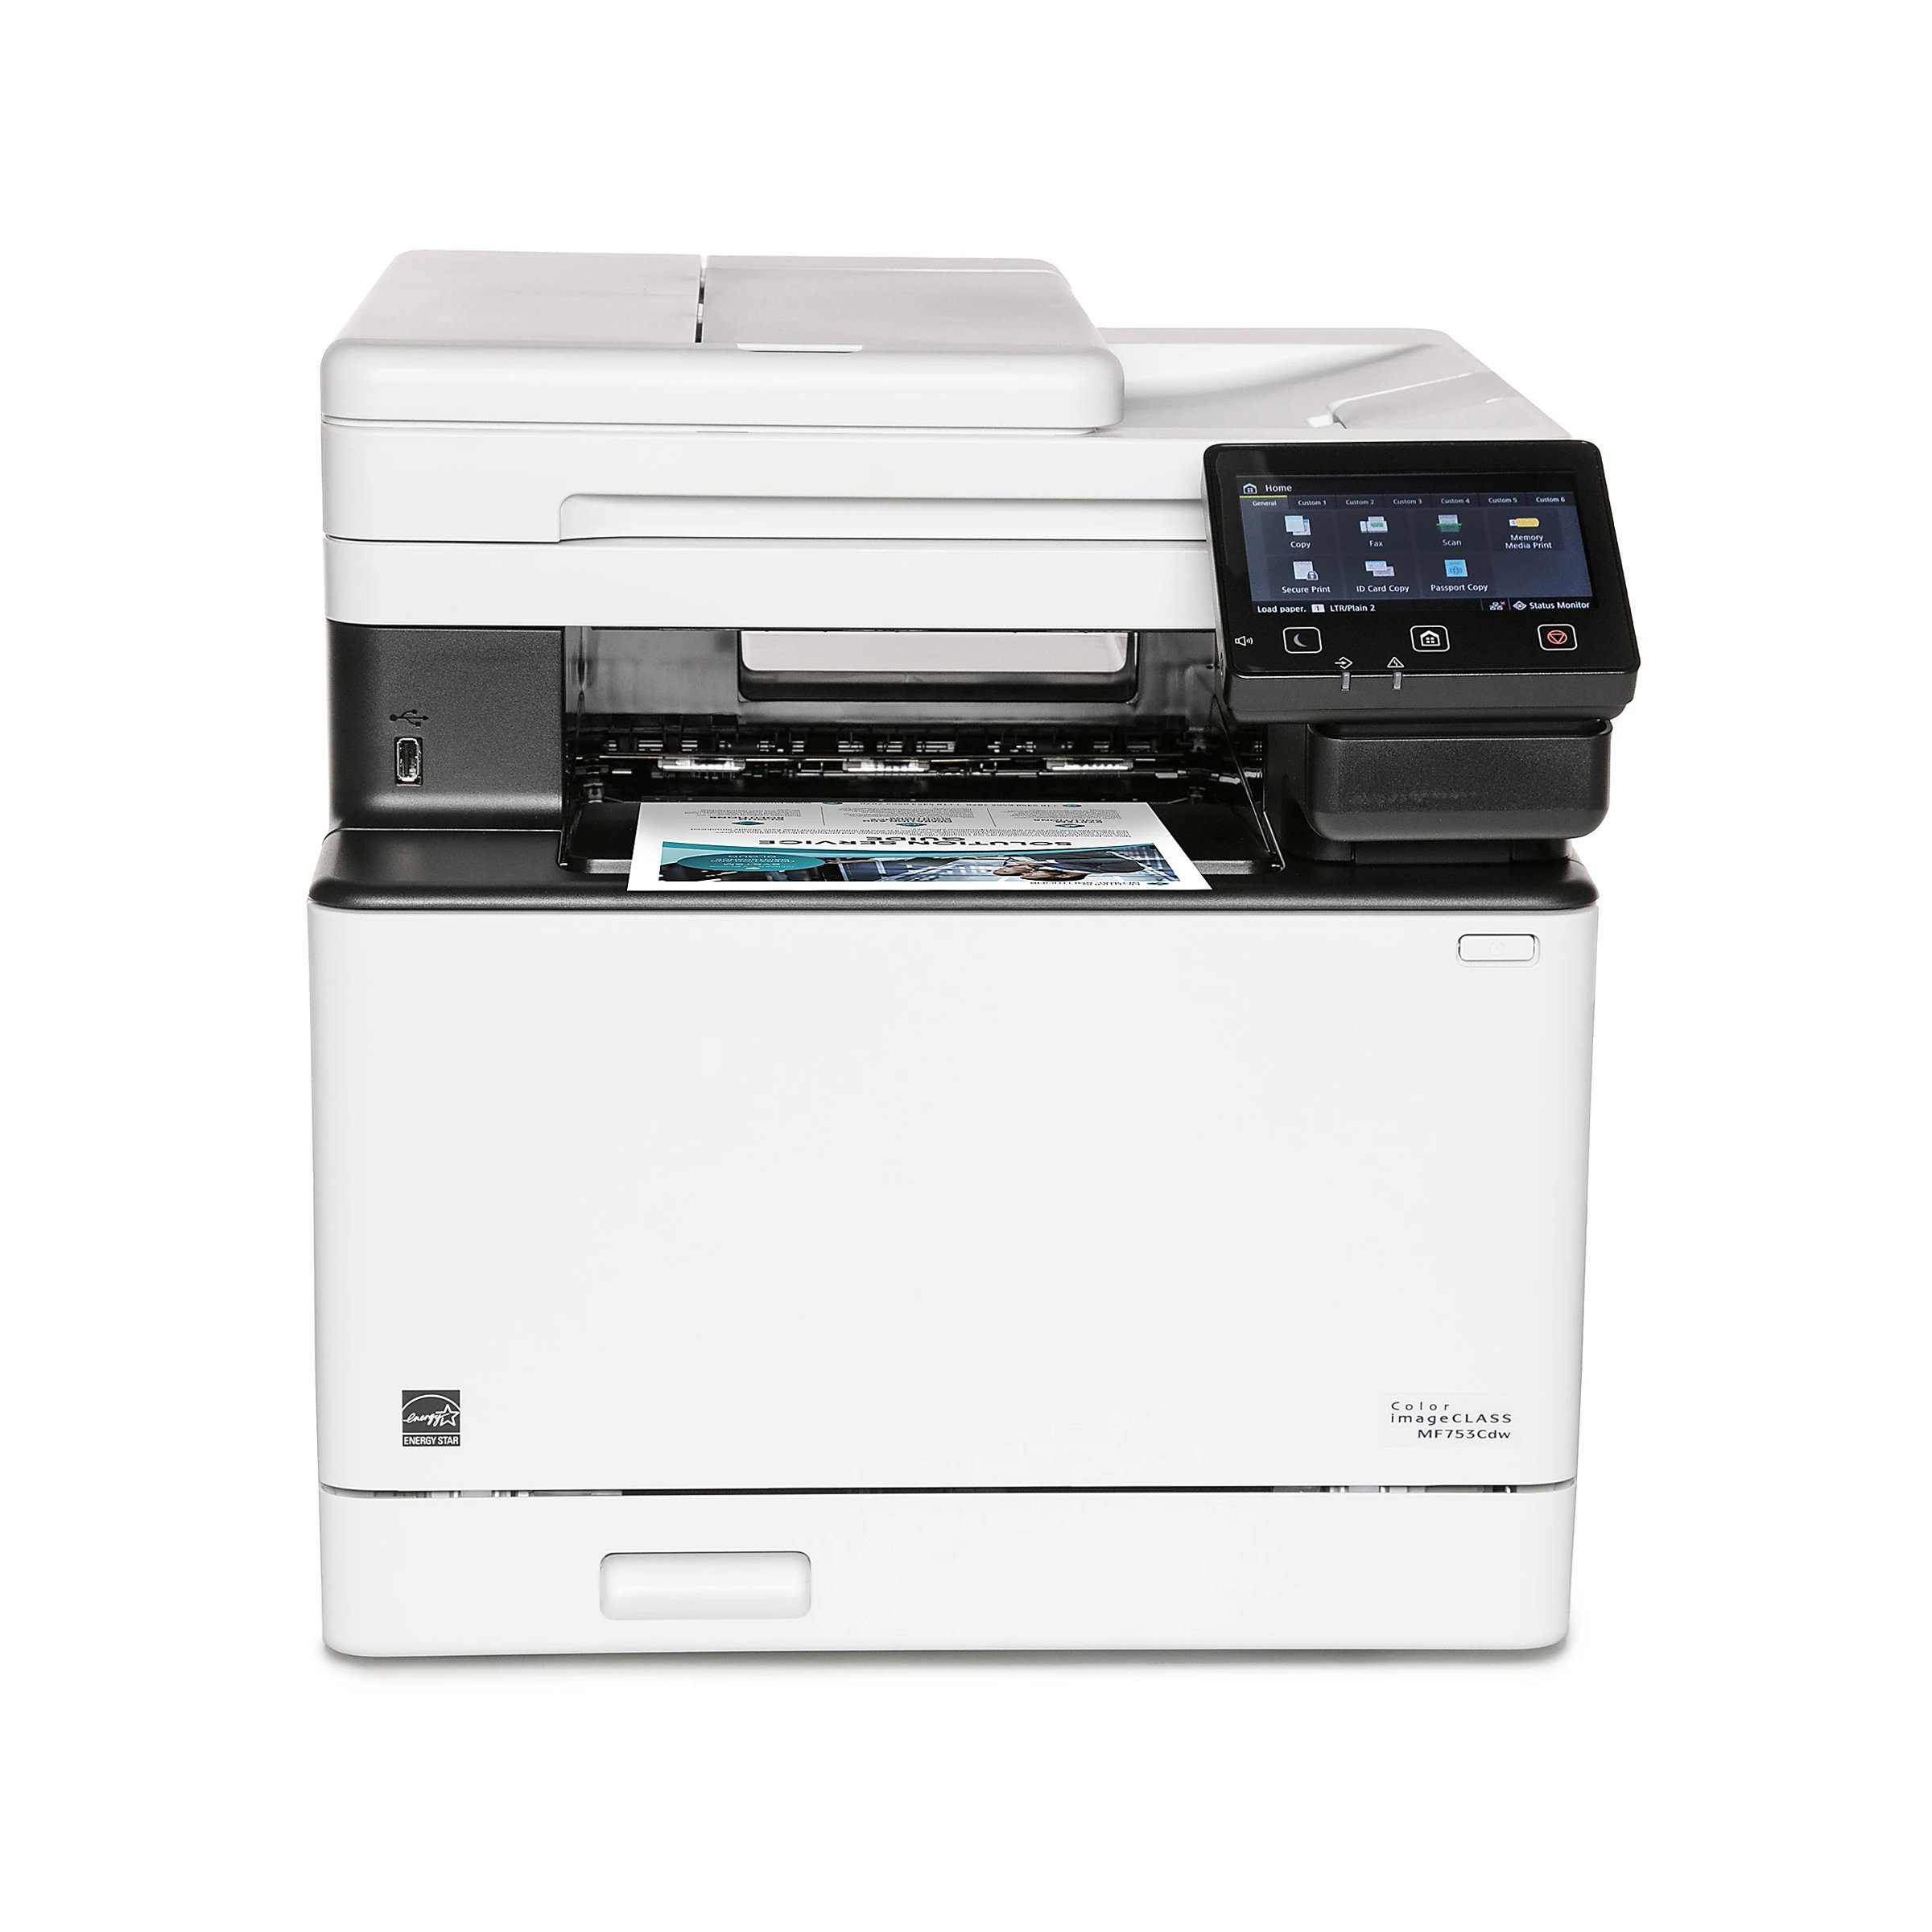 imageCLASS® MF758Cdw Wireless Laser All-In-One Color Printer (Refurbished)